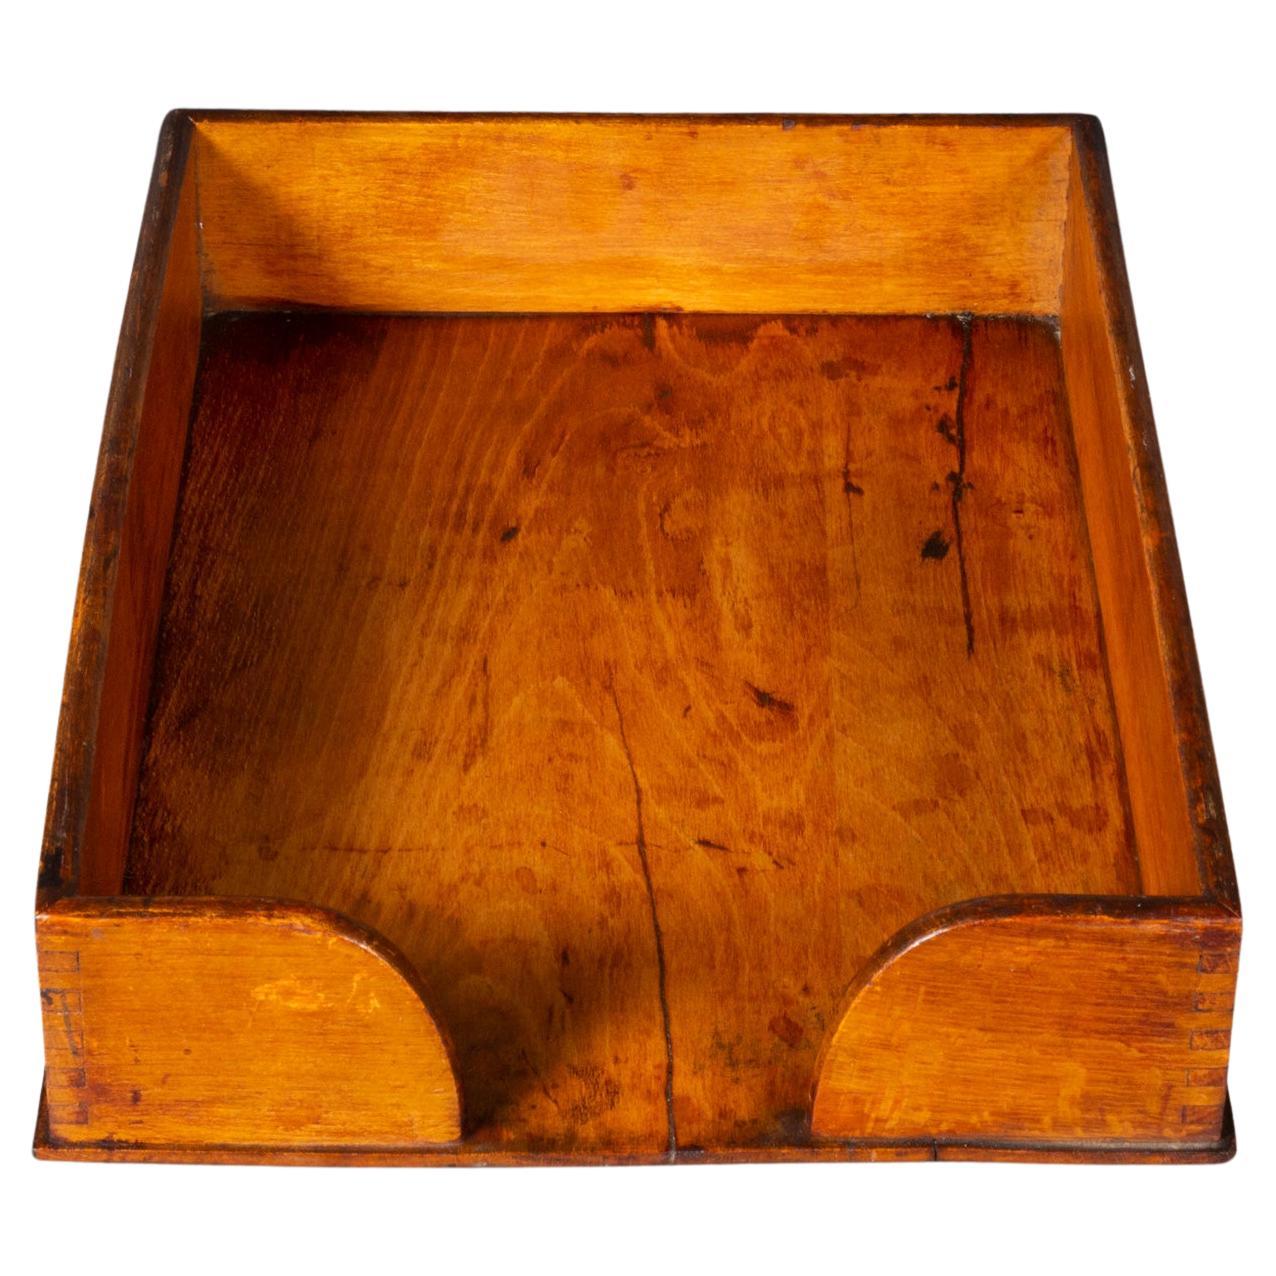 Antique Wooden Dovetail Office Tray c.1930 (FREE SHIPPING) For Sale